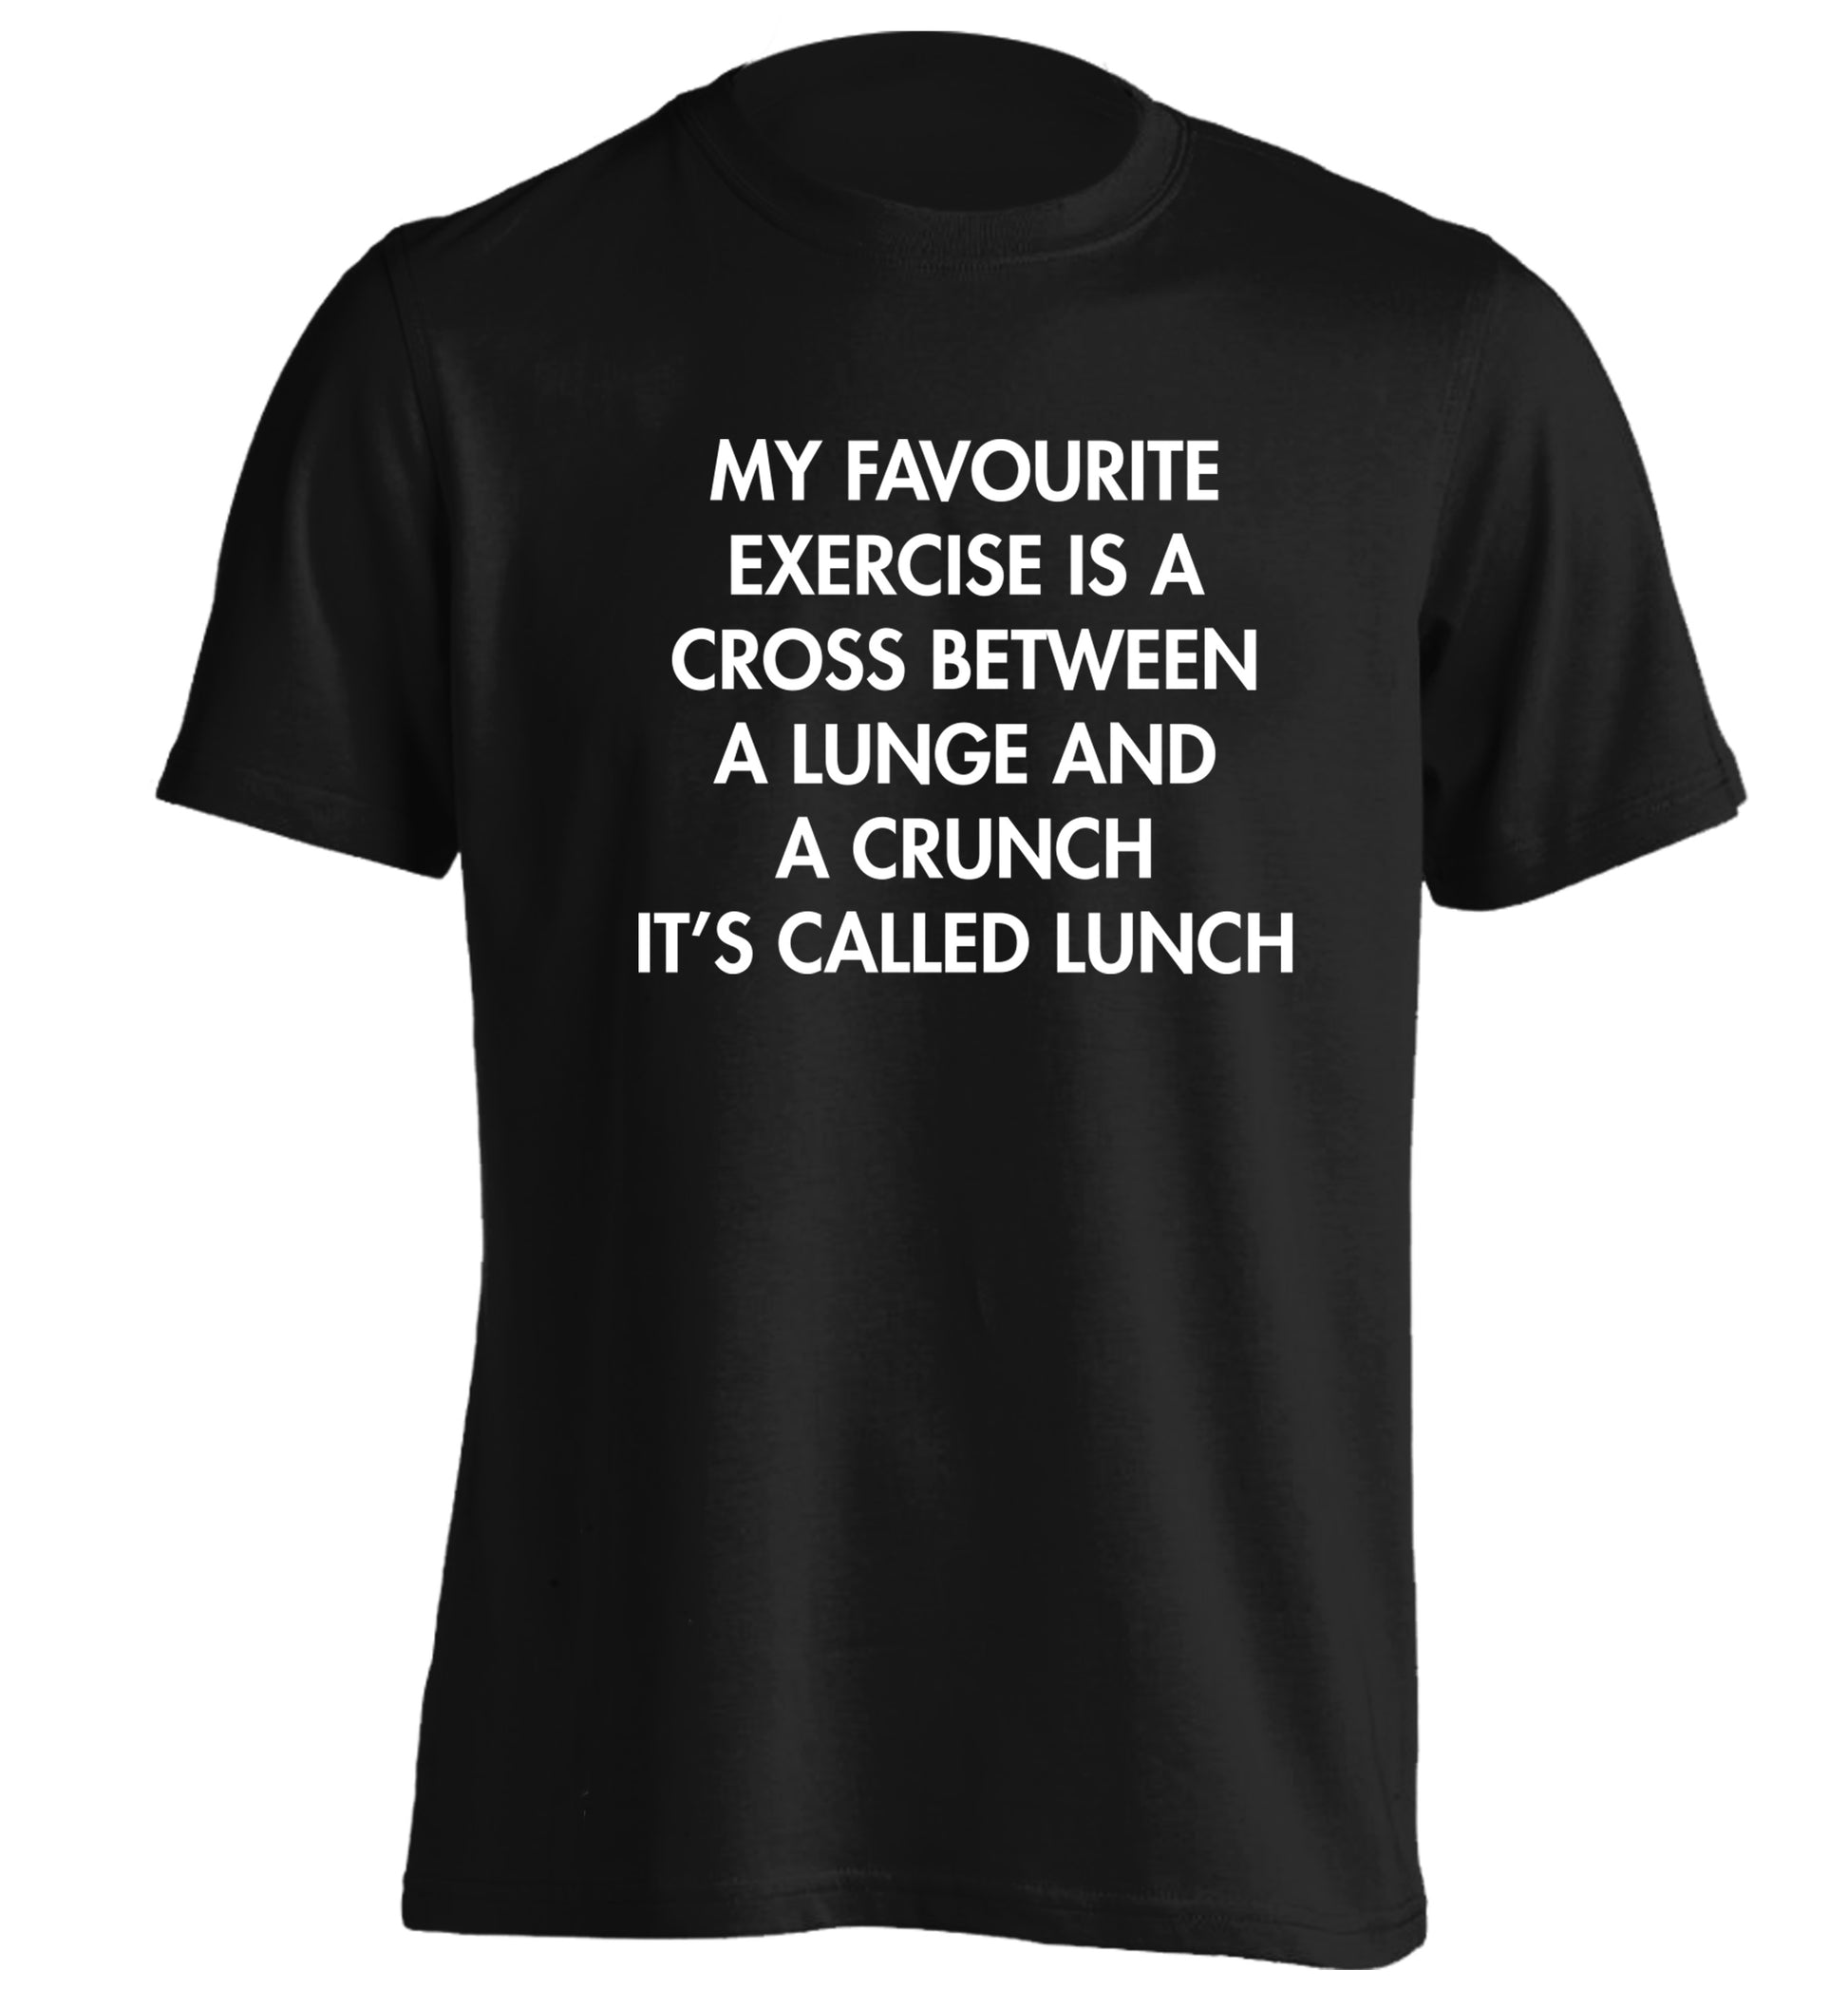 My favourite exercise is a cross between a lung and a crunch it's called lunch adults unisex black Tshirt 2XL